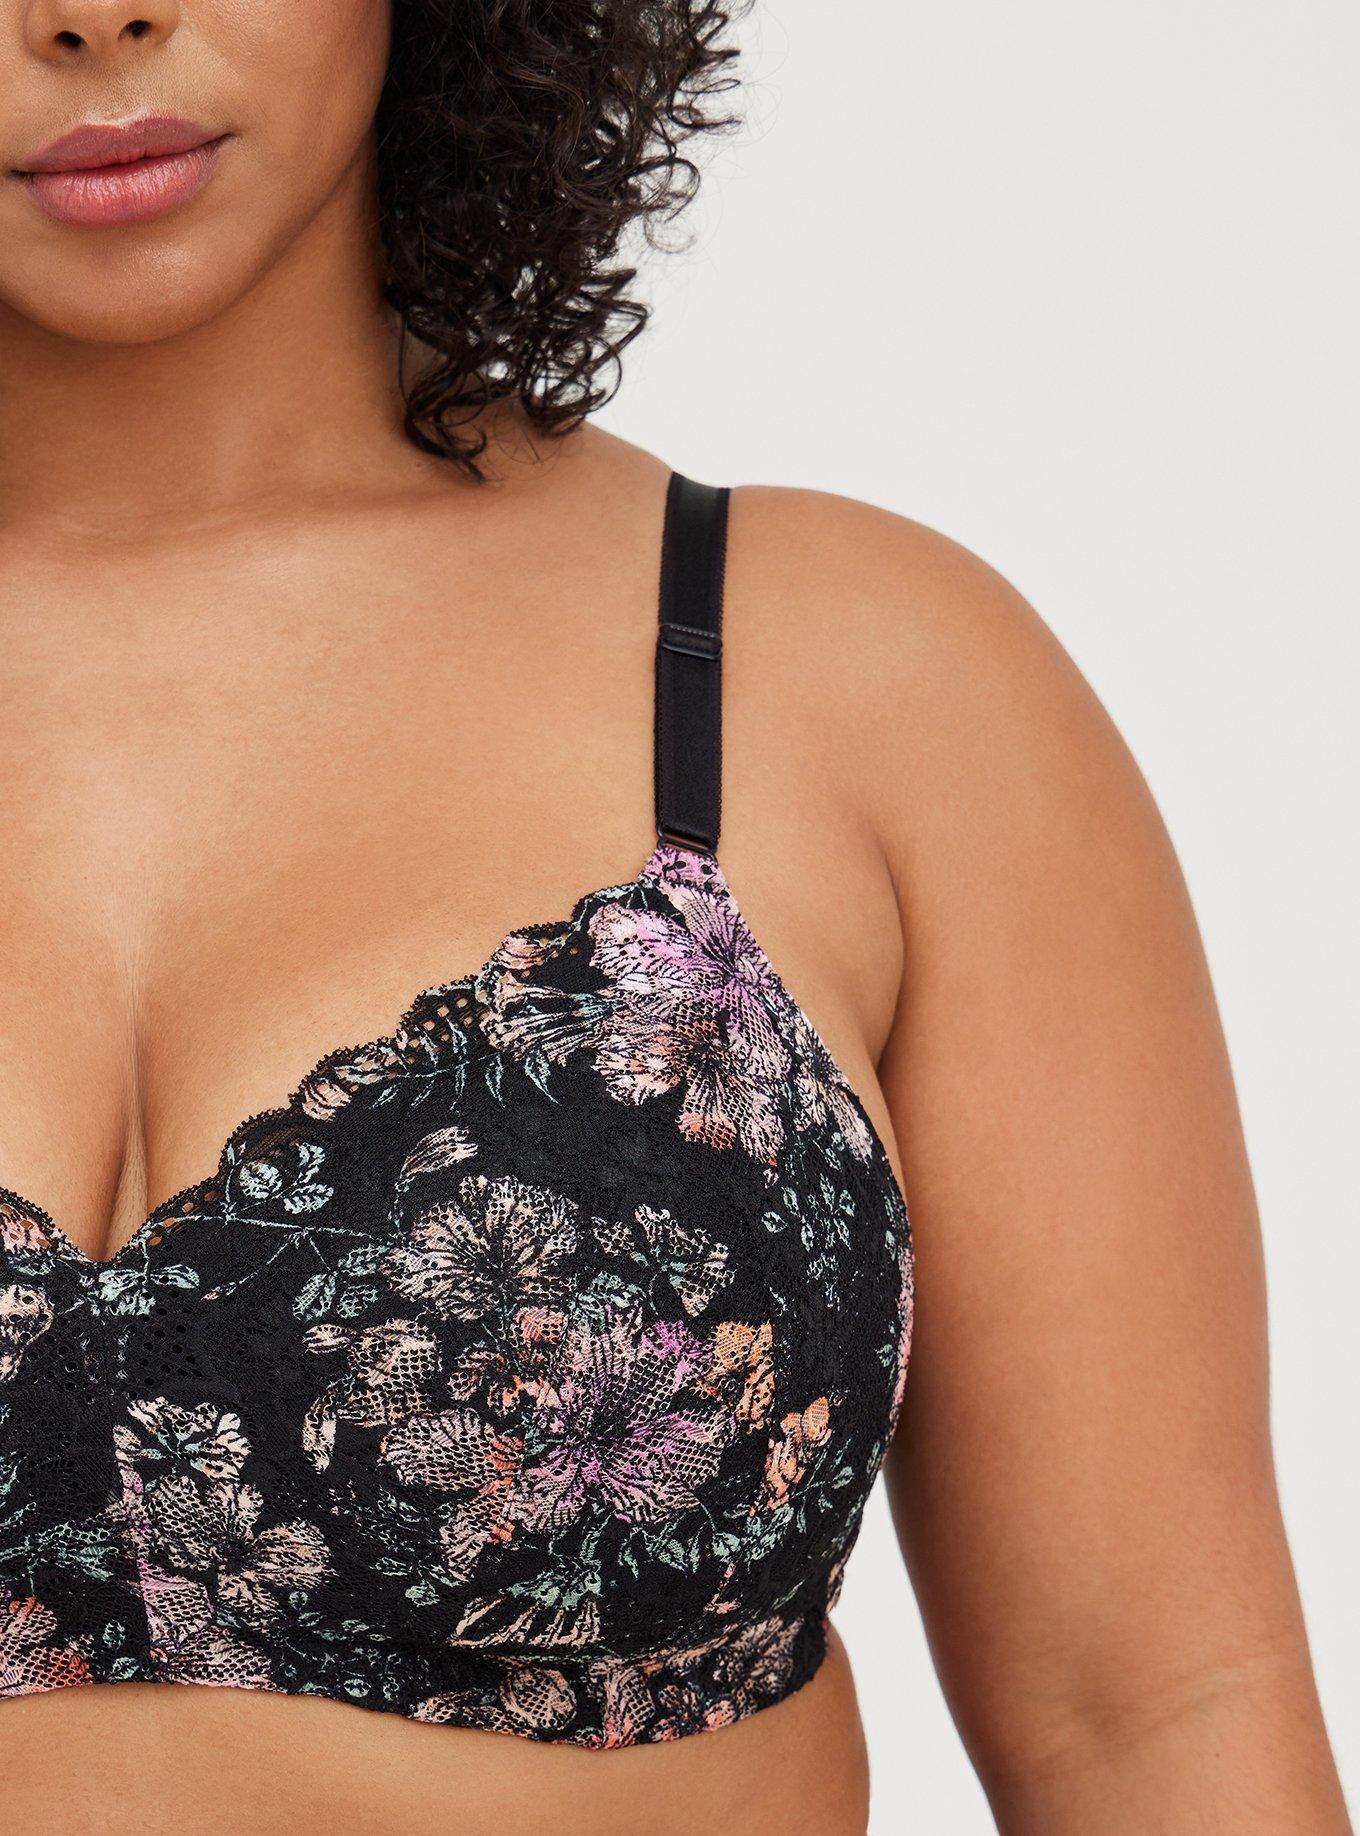 Torrid - Lightly Lined Longline Wire-Free Bra - Microfiber White with 360°  Back Smoothing™ 